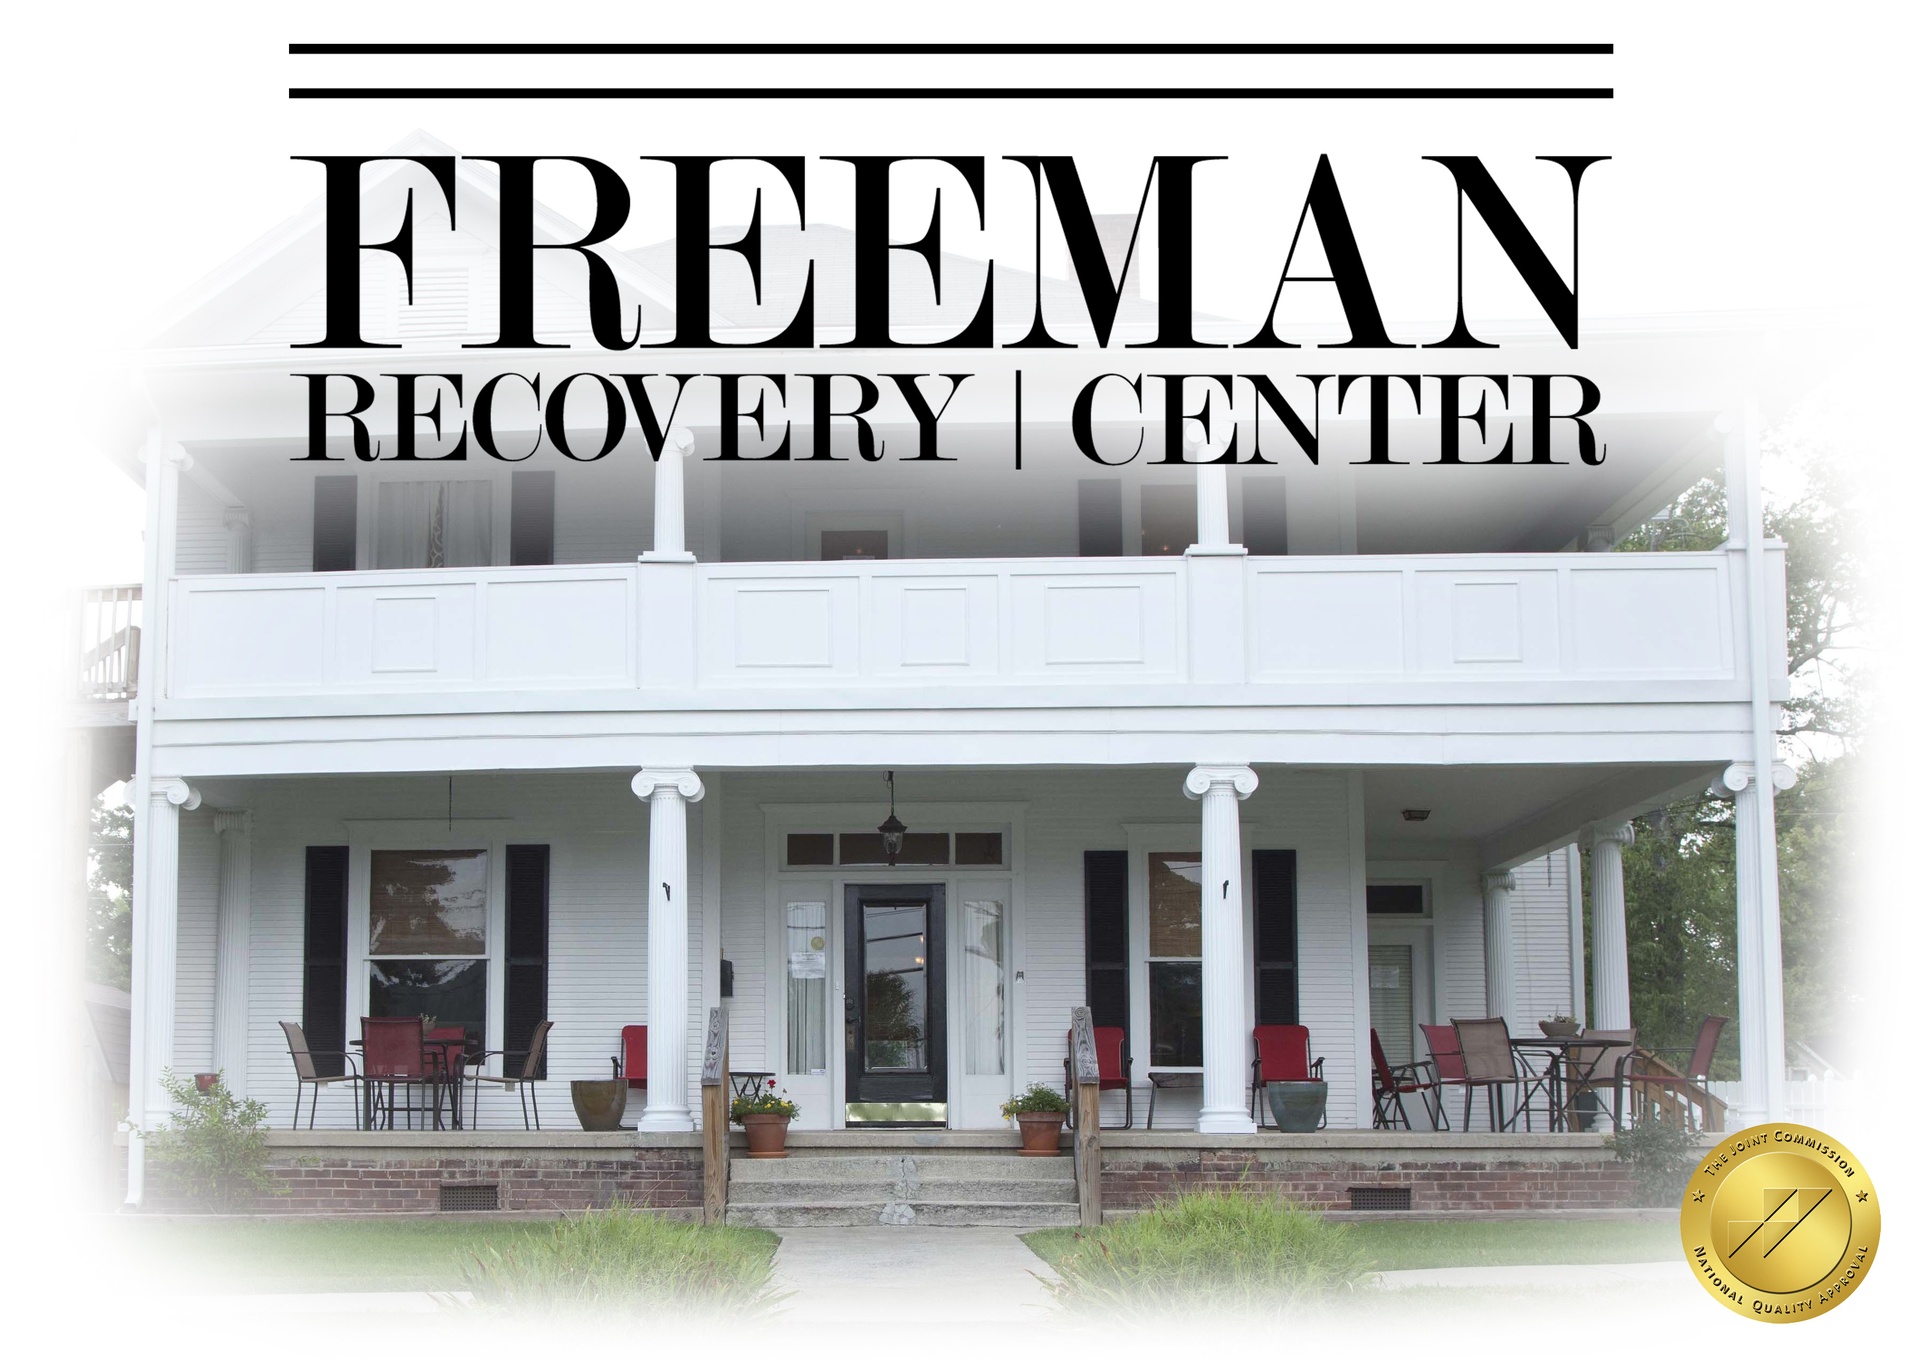 Freeman Recovery Center cover